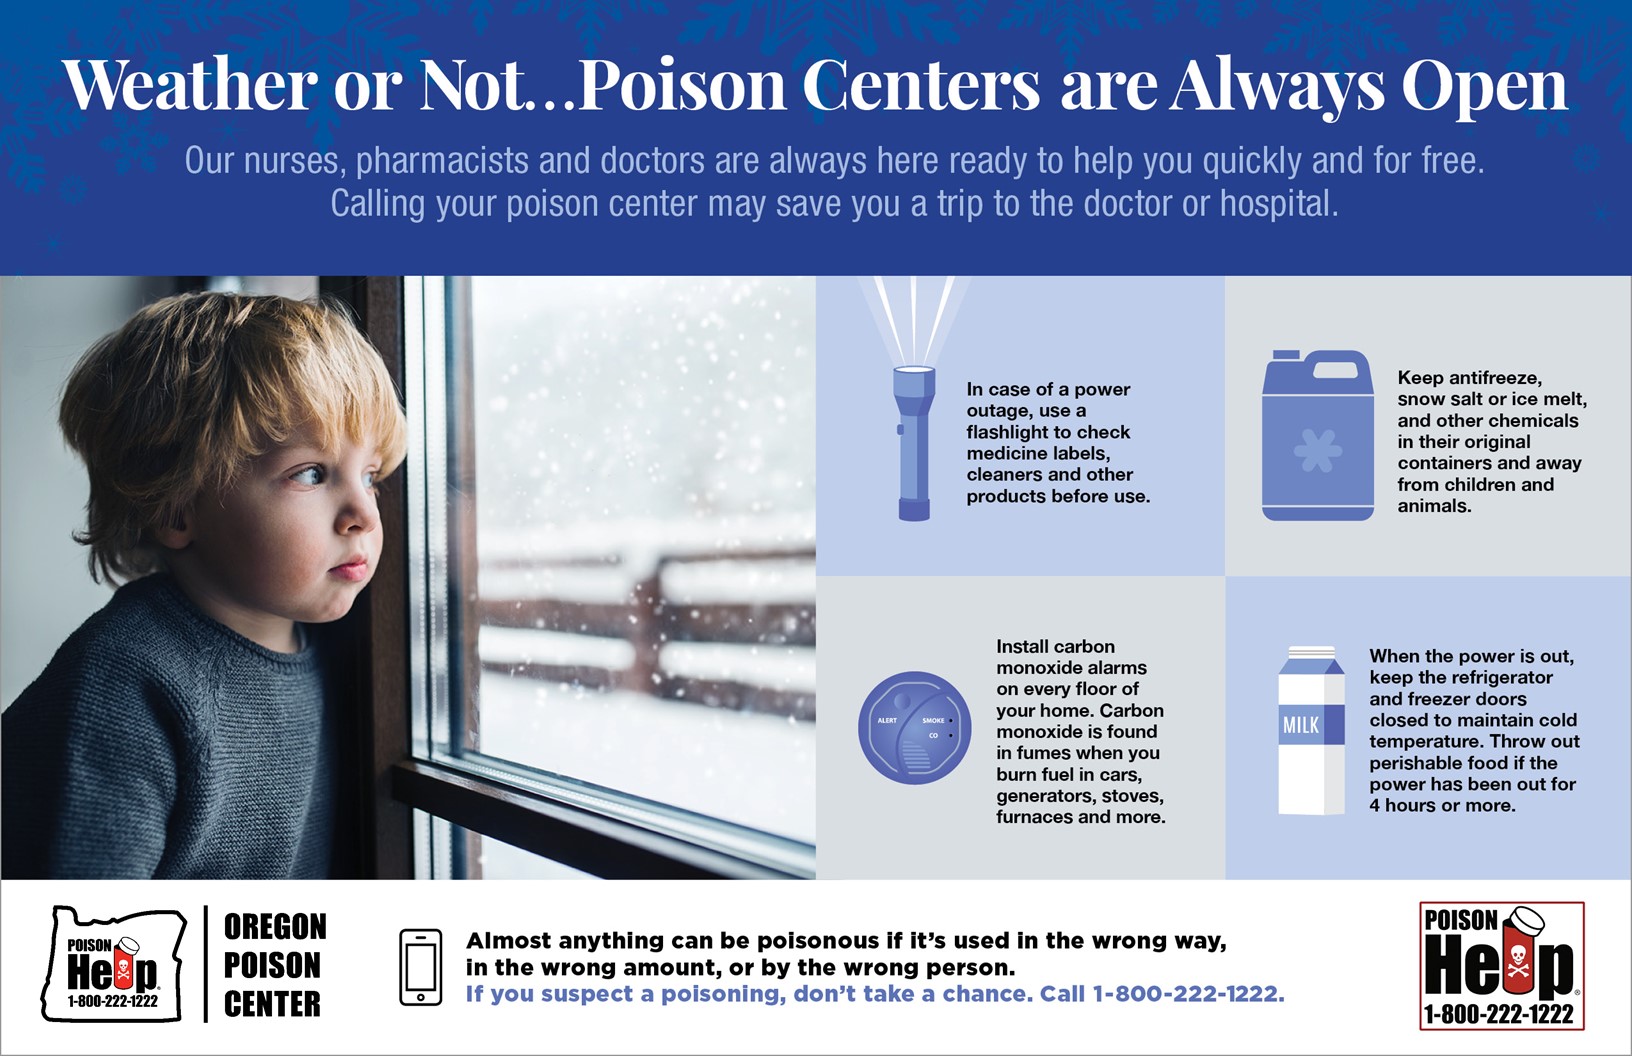 Prevent poisonings during winter weather events